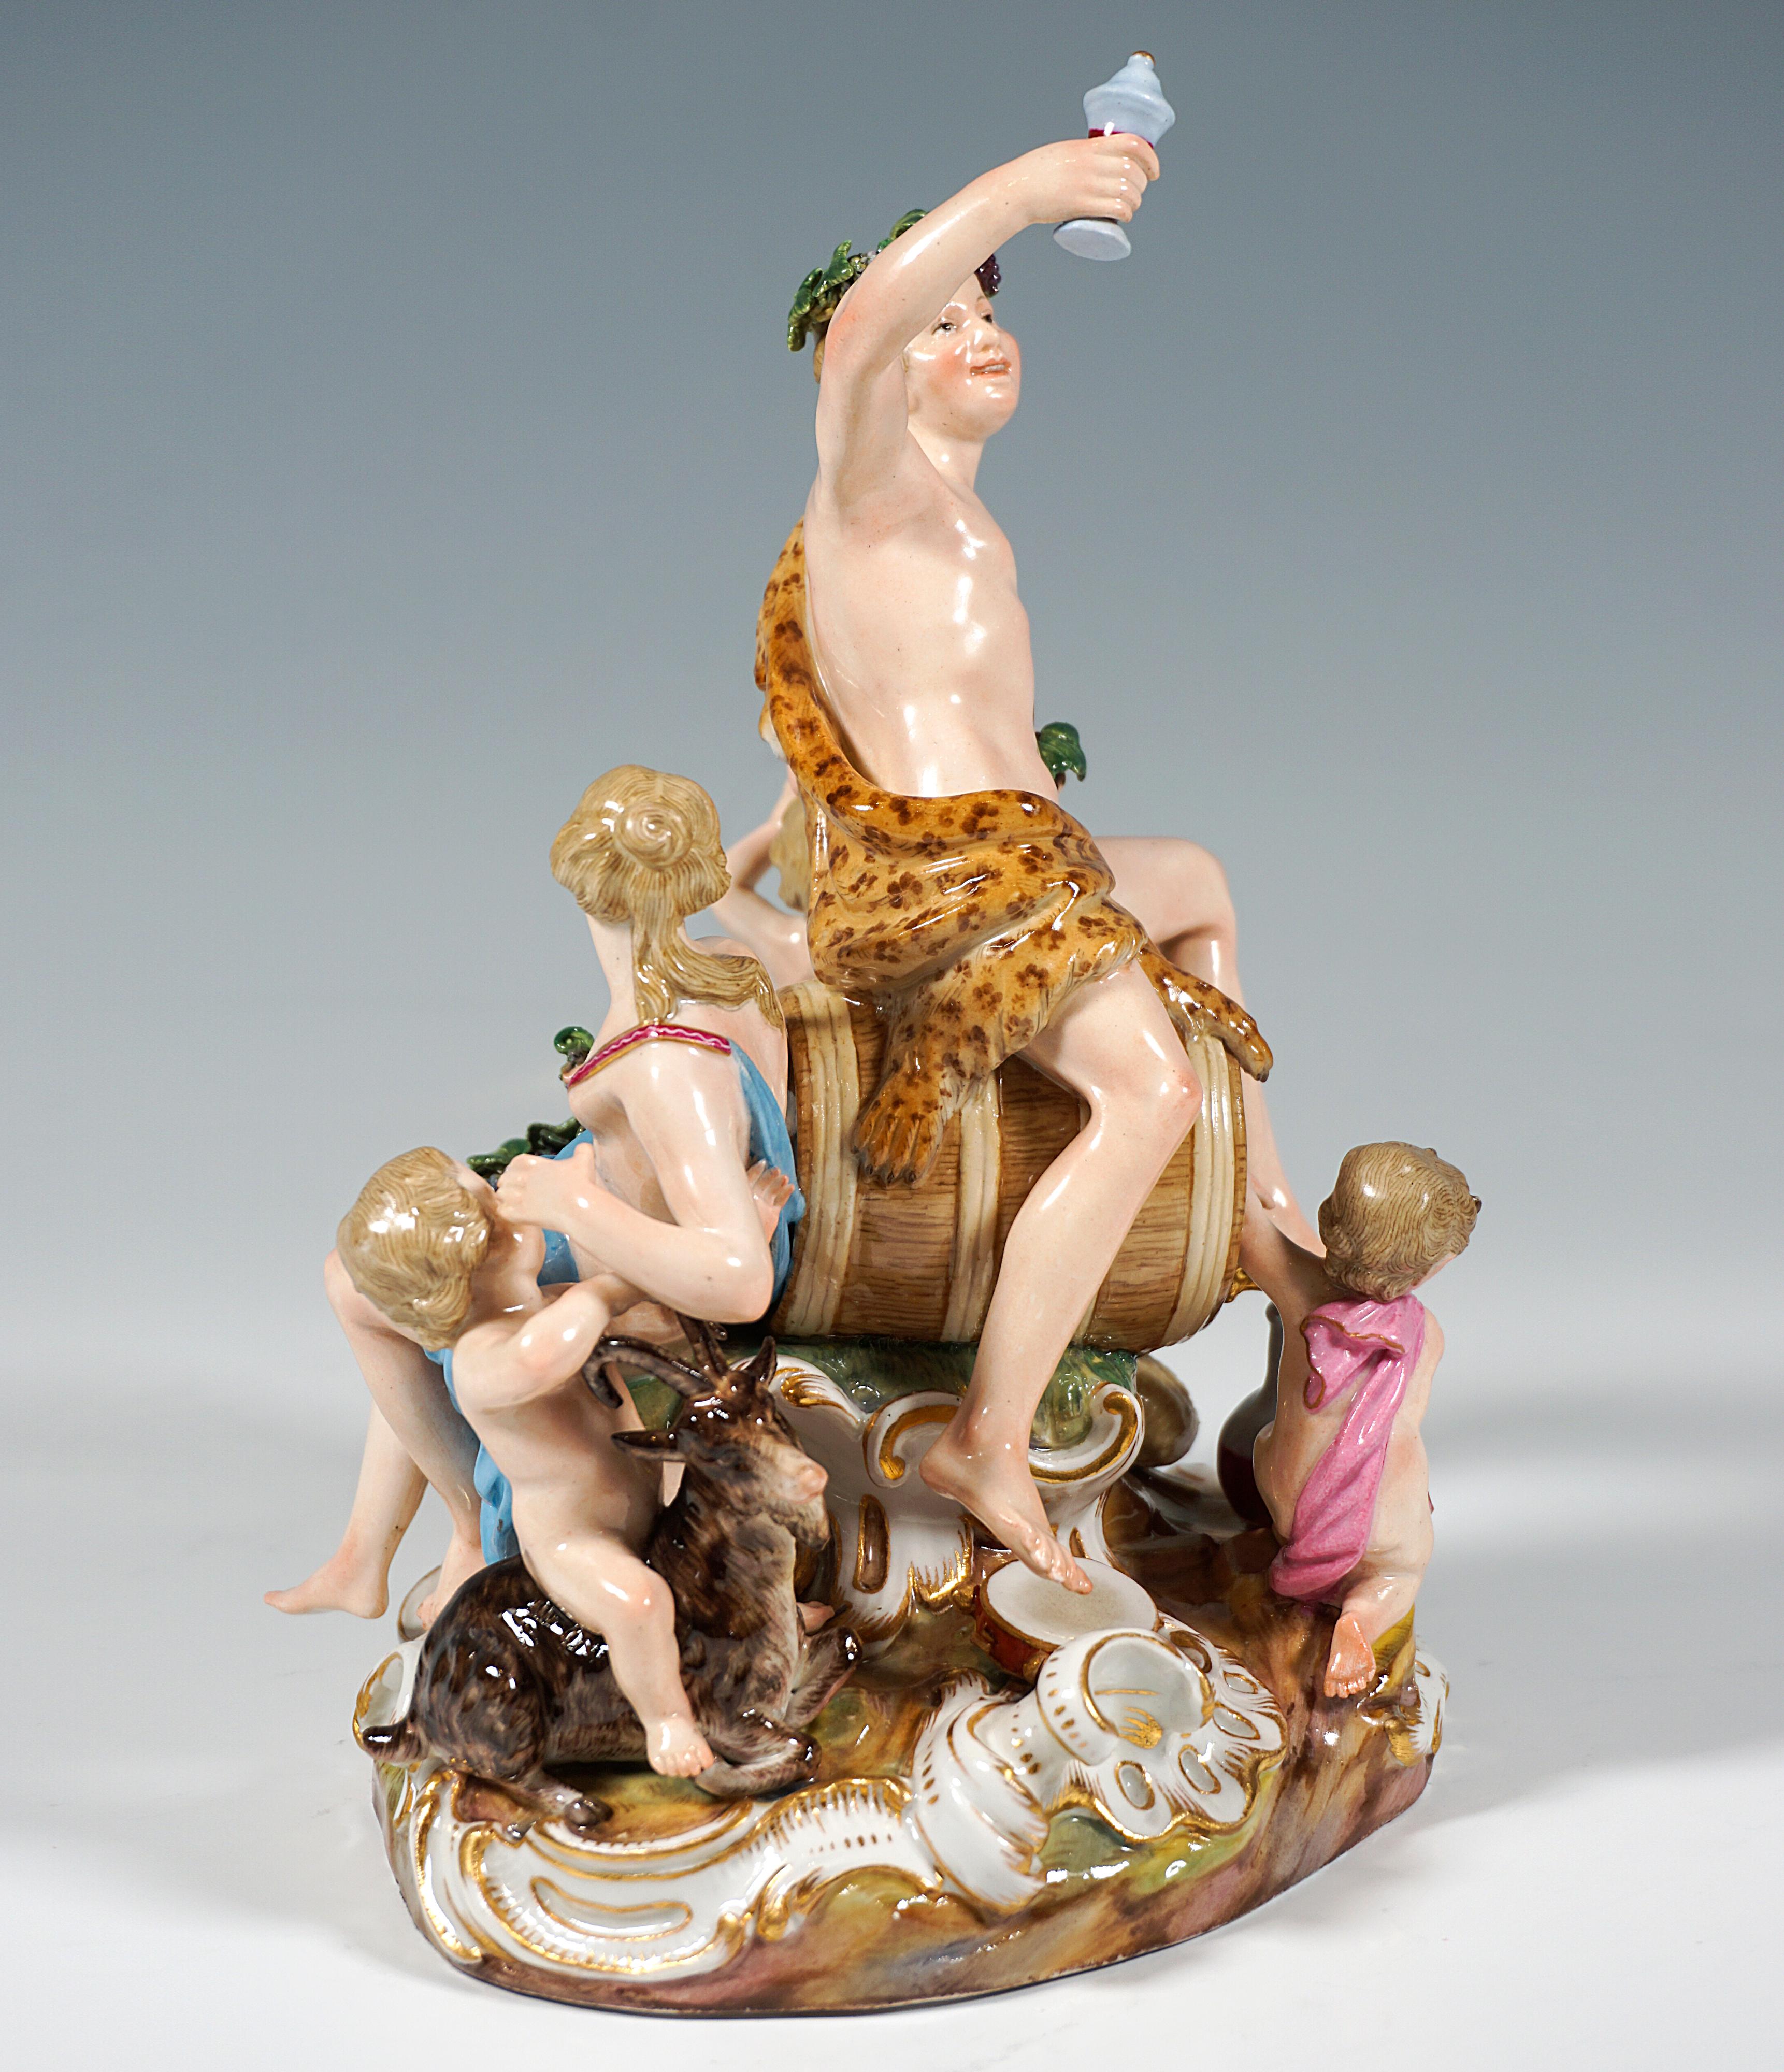 Rare, excellent porcelain group of the 19th century:
Youthful Bacchus with nymph and putti grouped around a large wine cask: The Bacchant, covered with a leopard skin, sitting sideways on the barrel, holding up grapes in his left hand and a wine